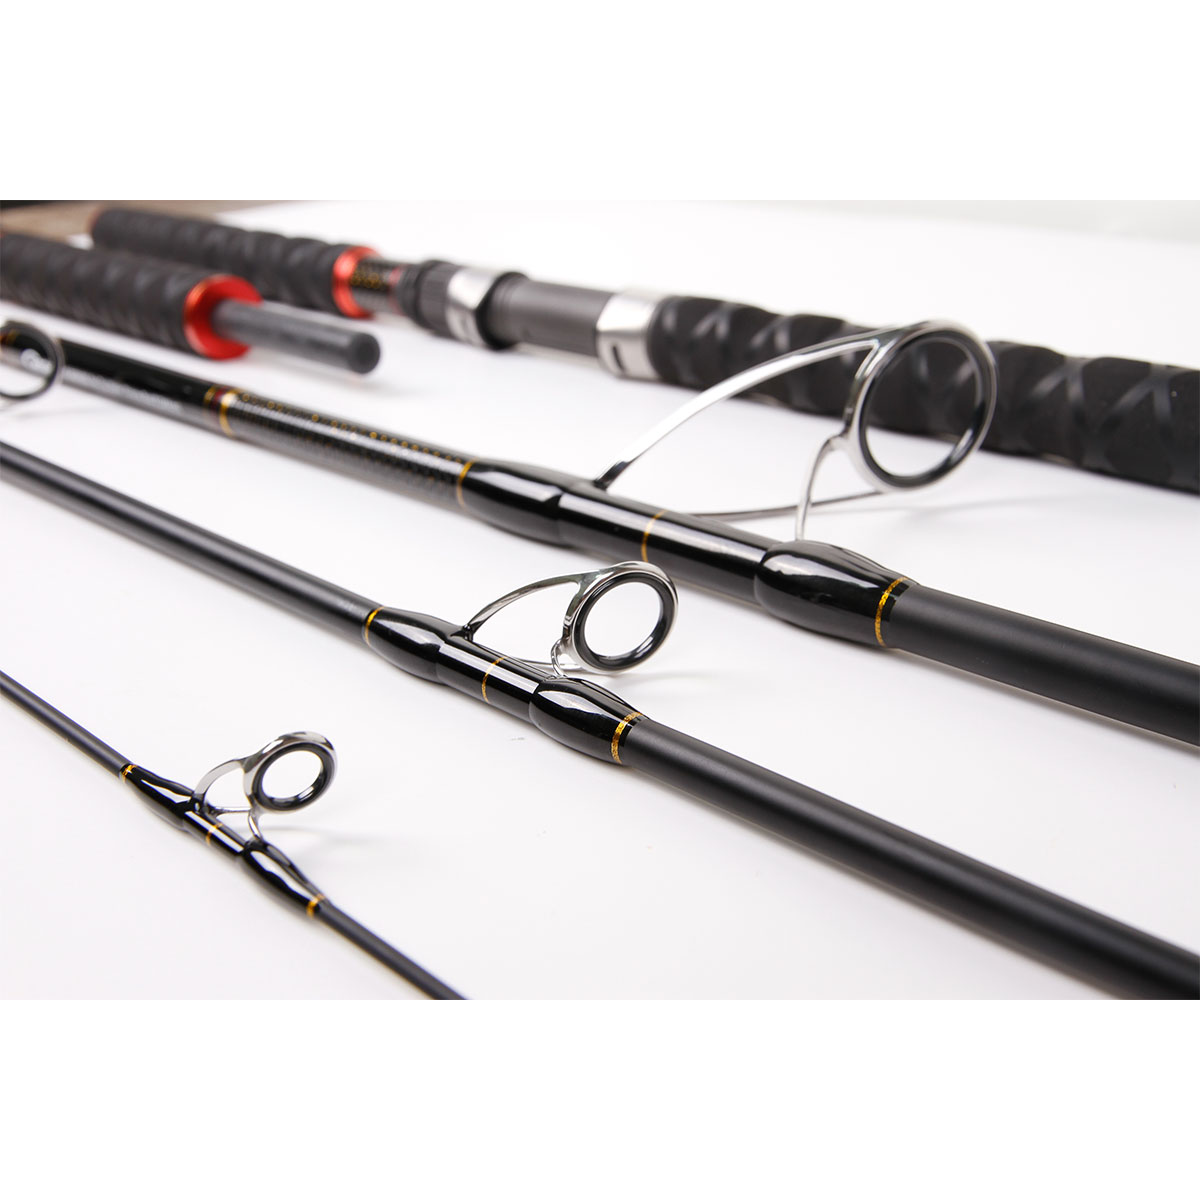 Catch Pro Series 5-Piece Top Water Xtreme Rod - BerleyPro